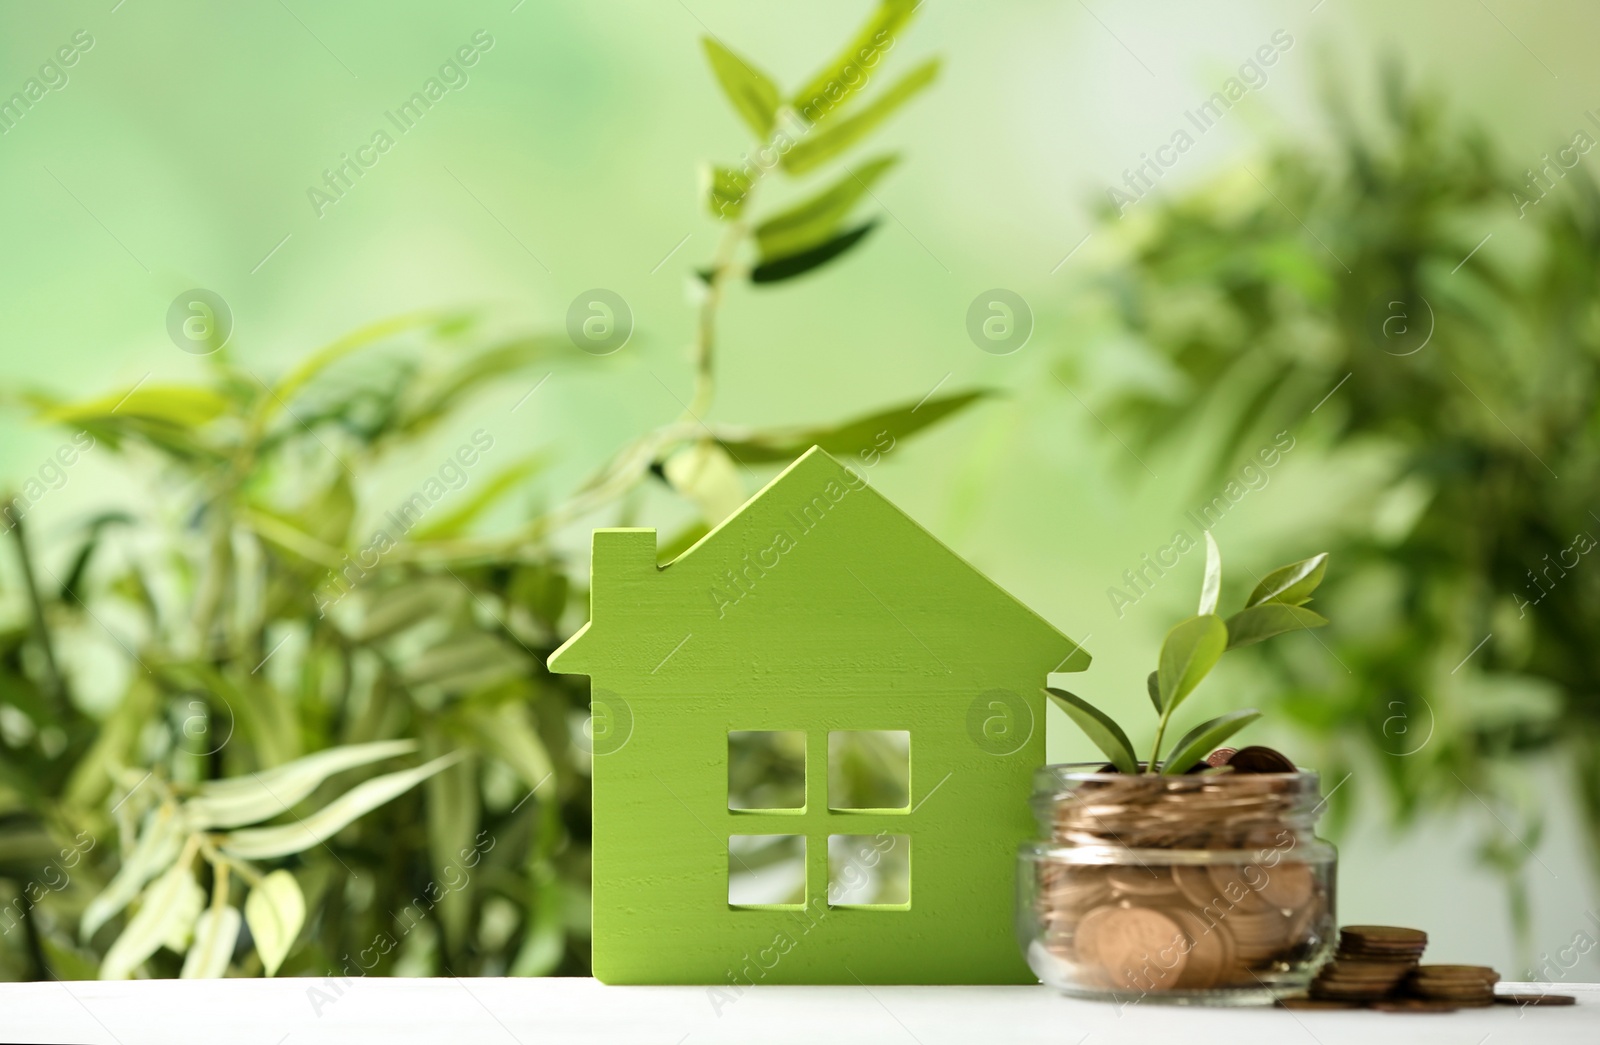 Photo of Model of house near jar with coins and plant on table against blurred white background. Space for text